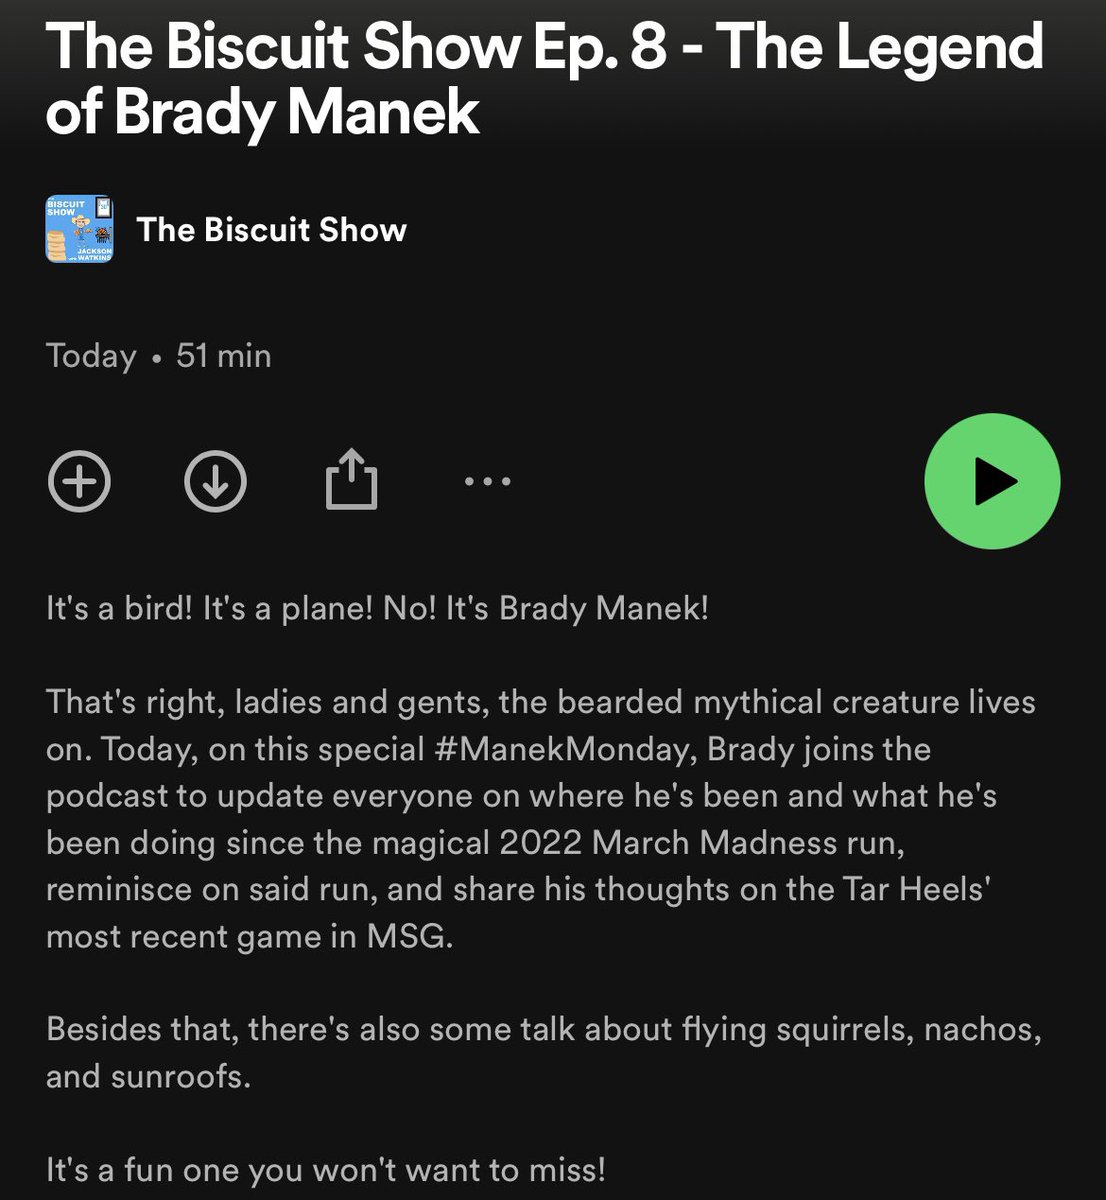 it’s not just any #ManekMonday … cuz he’s on this week’s episode of The Biscuit Show! Show @BradyManek some love and enjoy the listen! open.spotify.com/episode/7CVt7z… #bradymanek #uncbasketball #biscuits